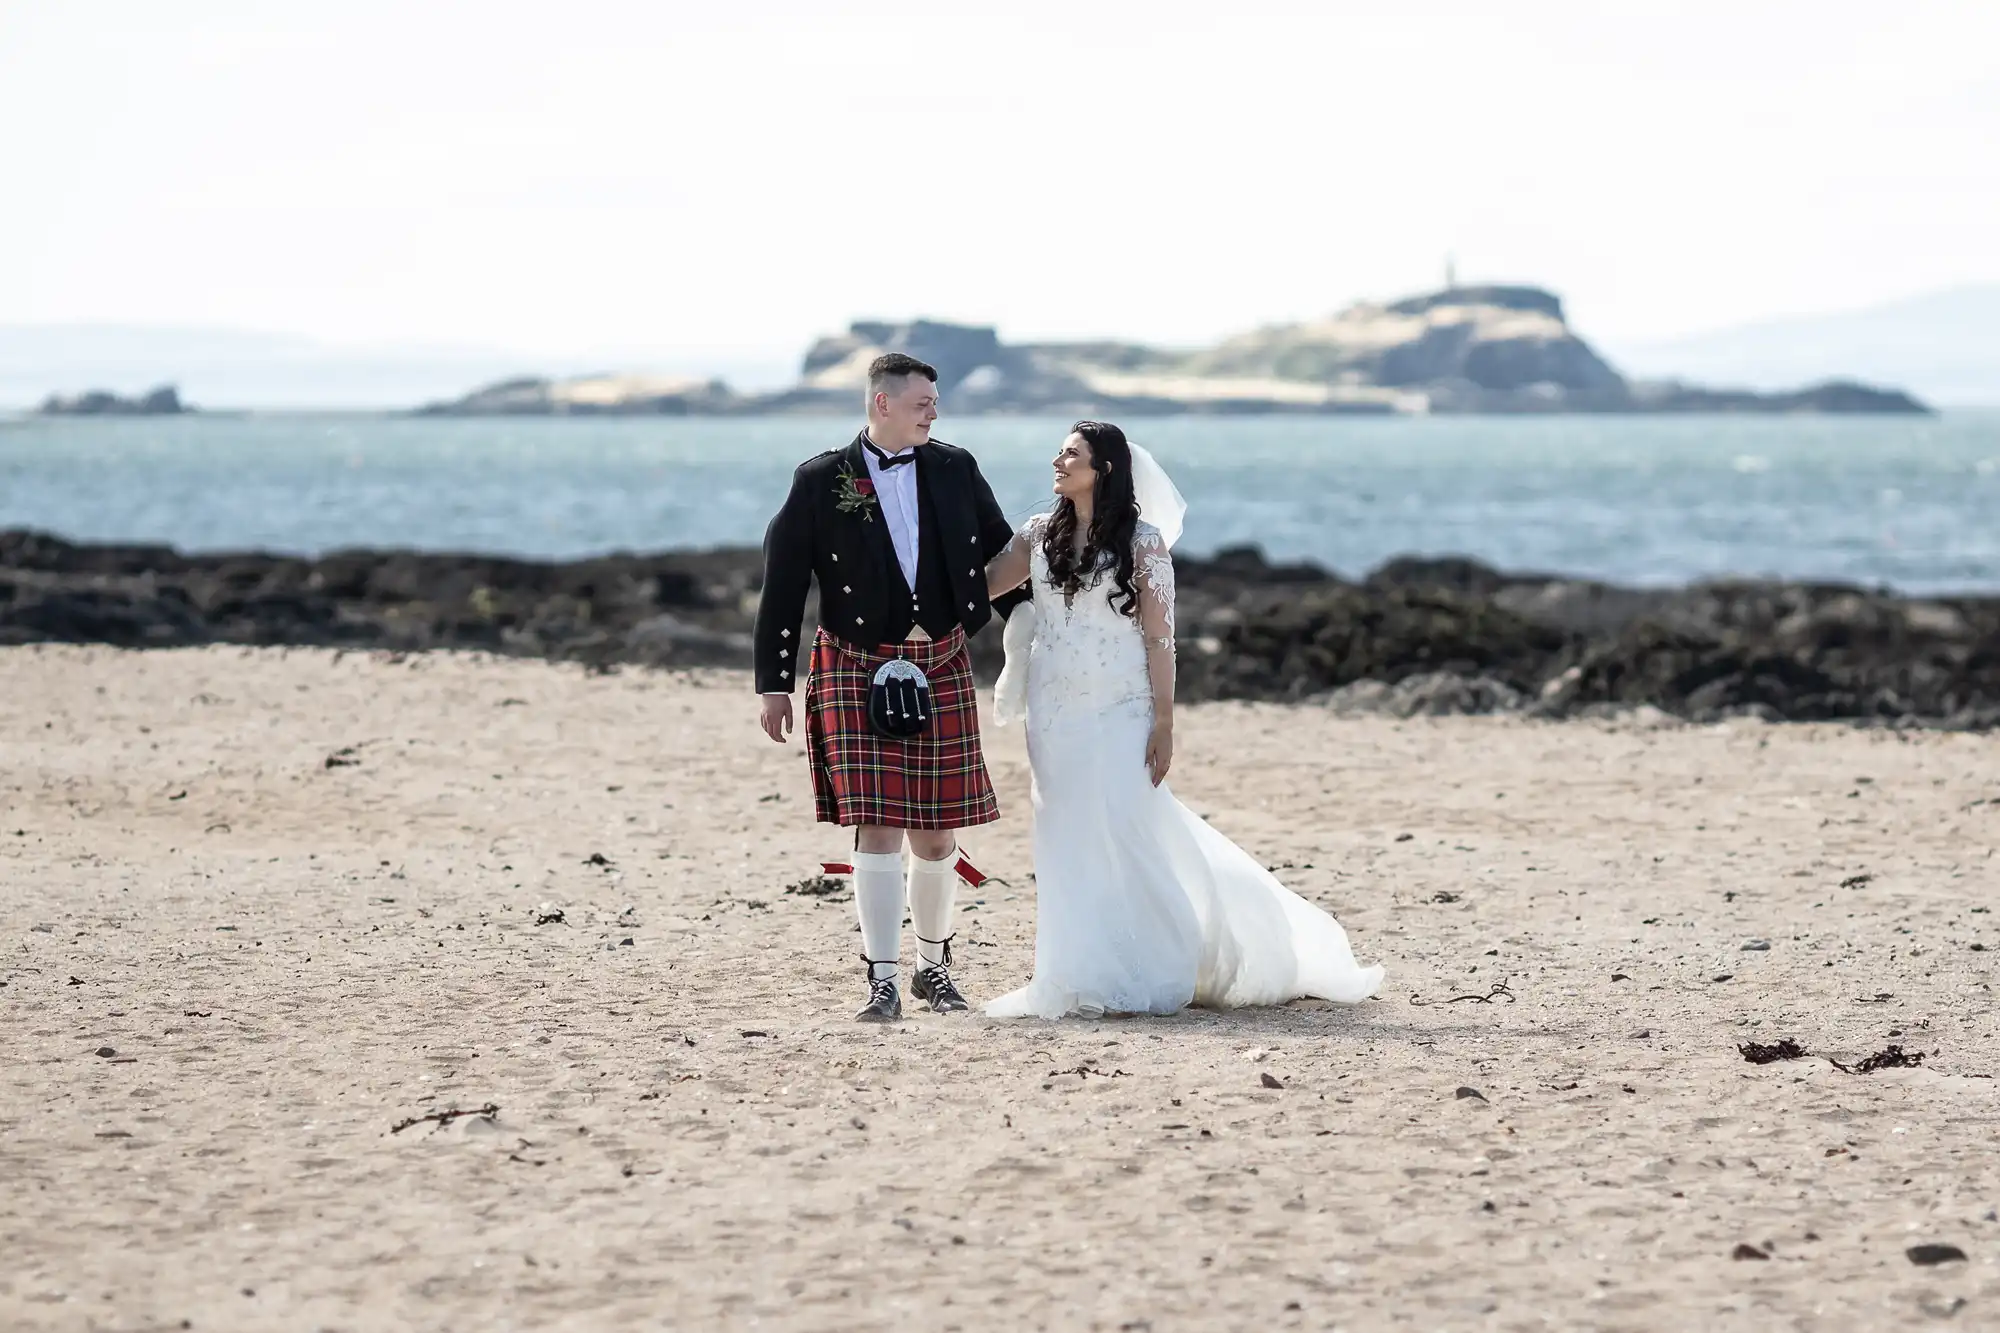 Bride in a white dress and groom in a Scottish kilt walking on a sandy beach with an island in the background.